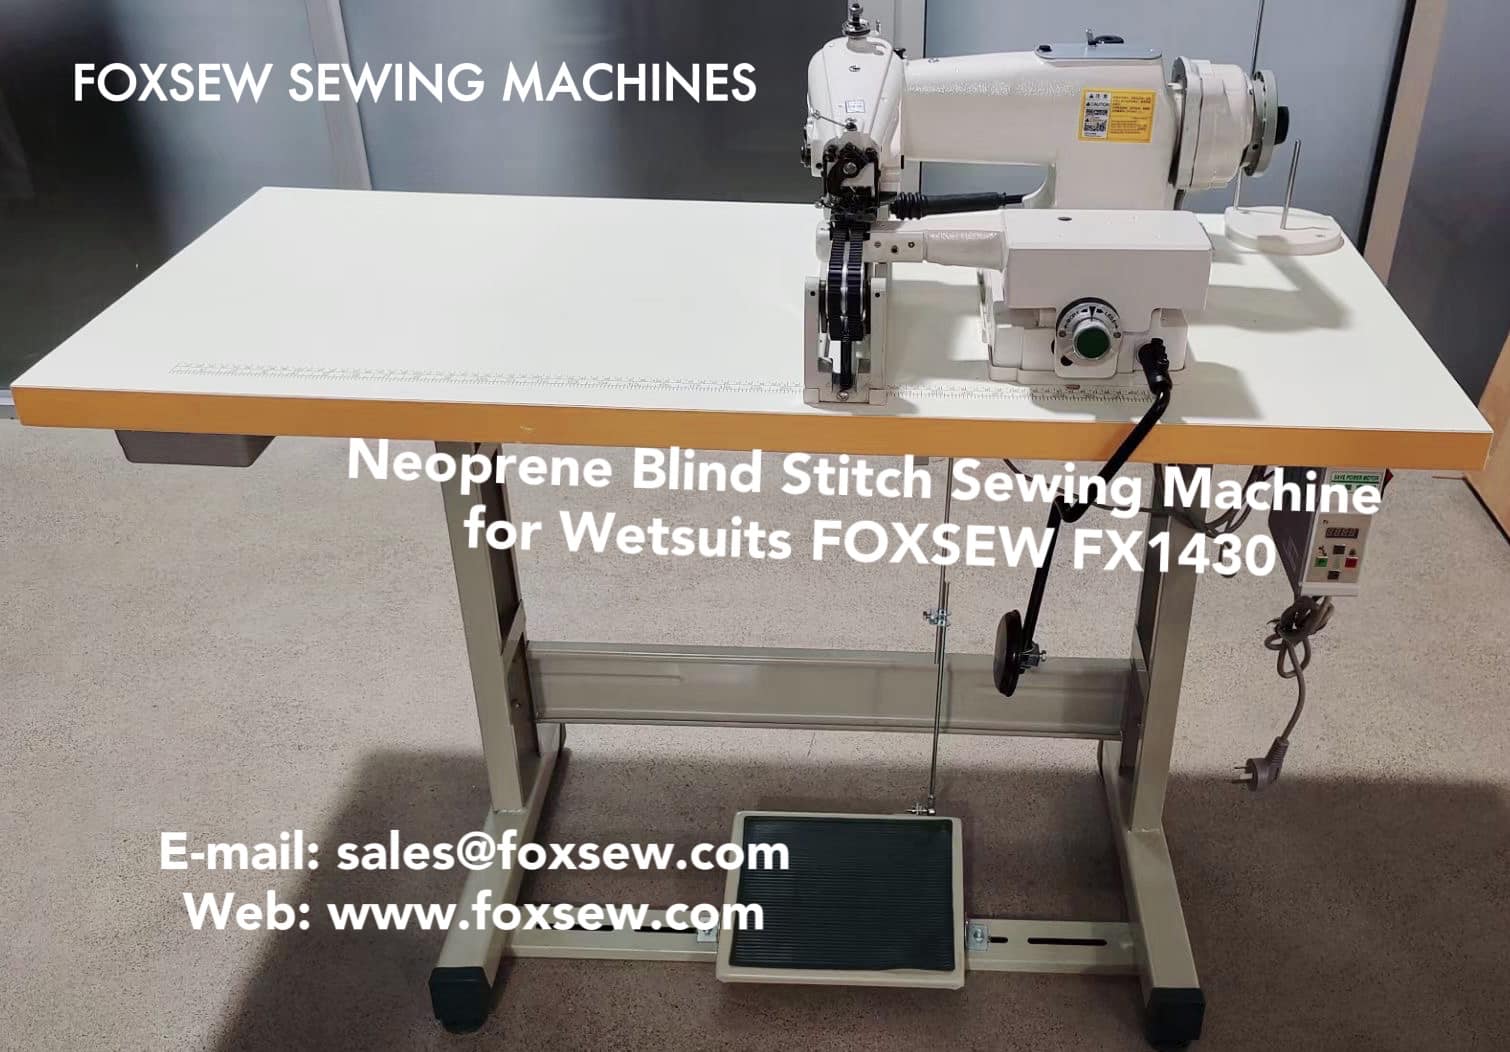 Neoprene Blind Stitch Sewing Machine for Diving Suits FOXSEW FX1430 -5